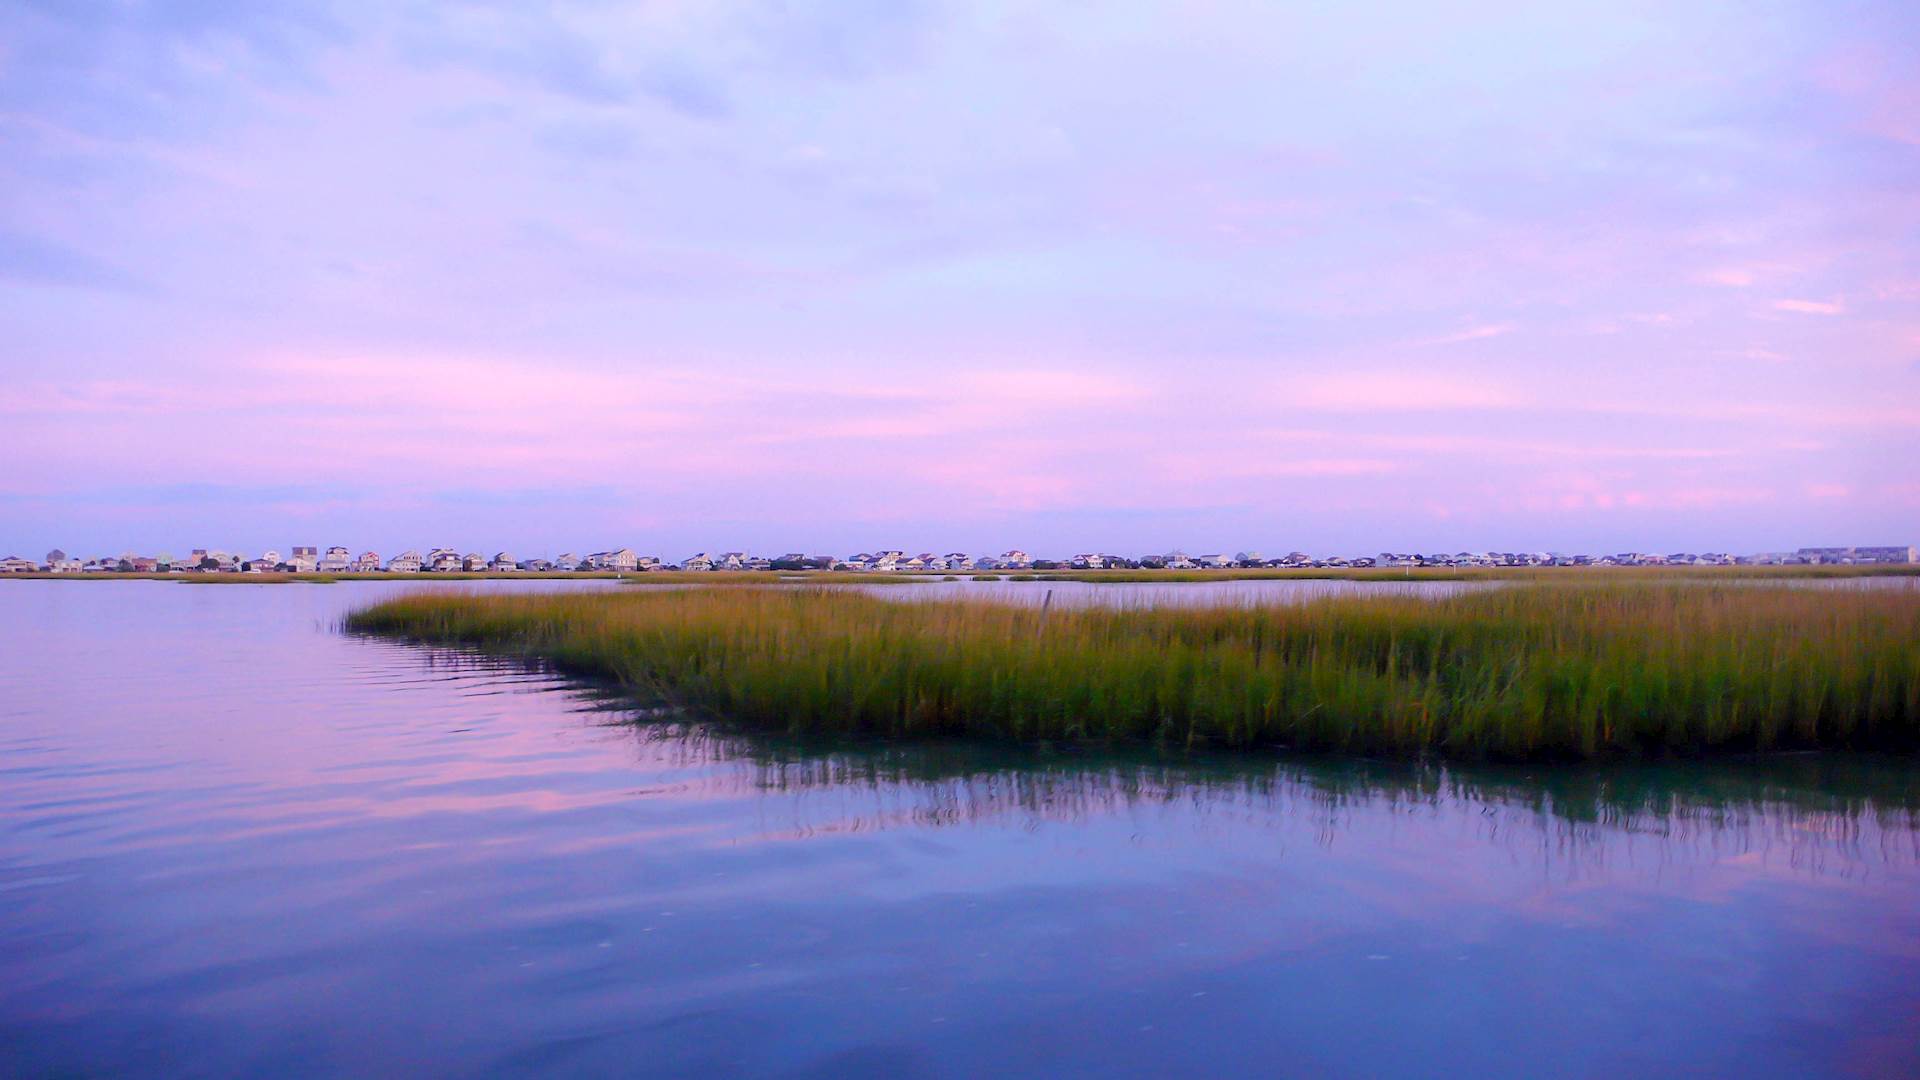 beautiful sunset setting over water and marshlands in the barrier island creekside waters of the South Carolina coast